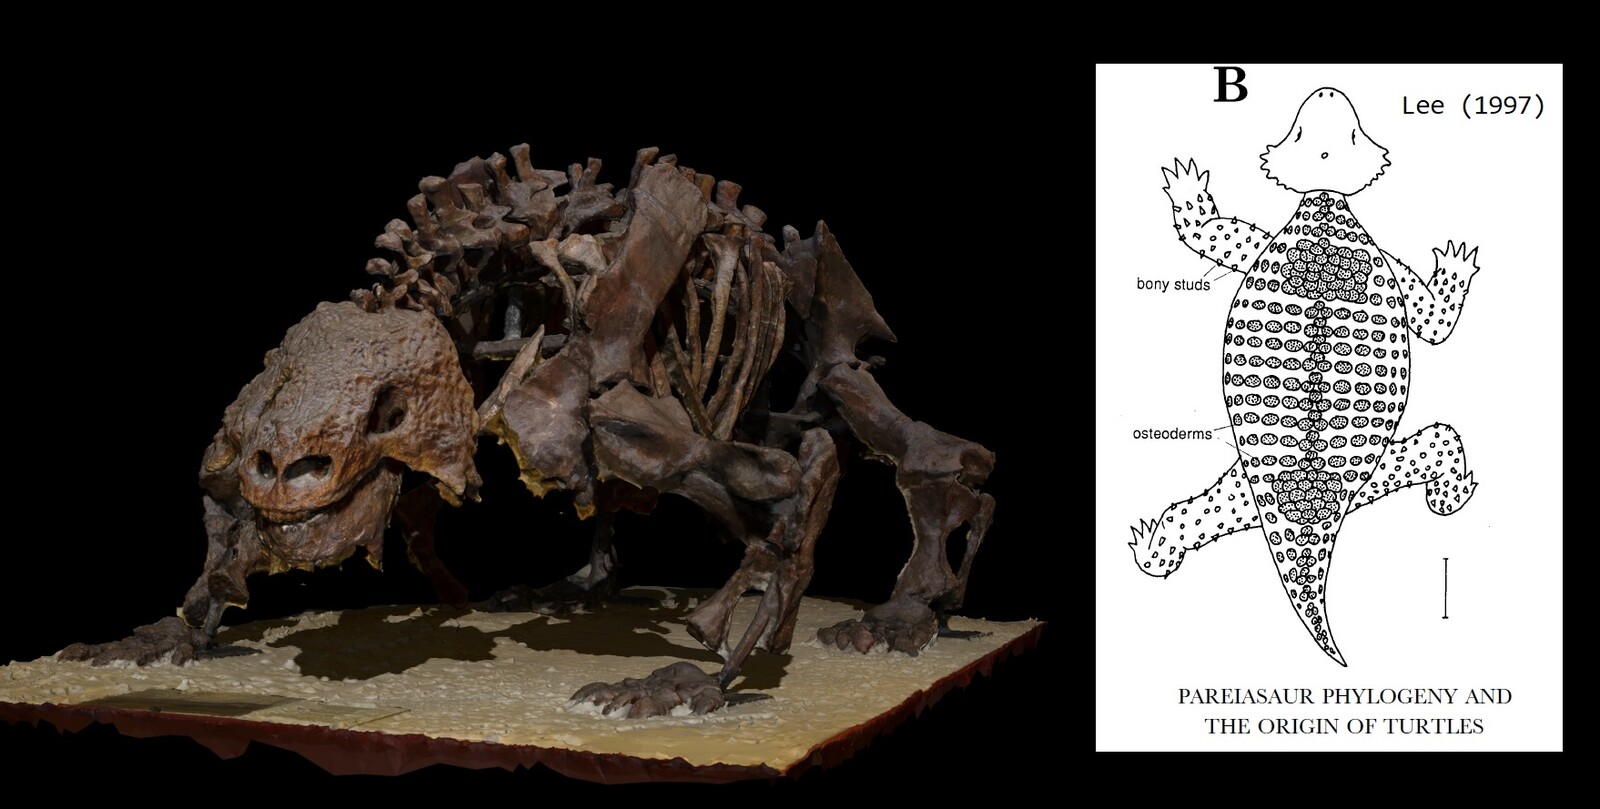 The photogrammetry and one of the few charts about the possible disposition of the osteoderms (it has small conical "studs" over the limbs)